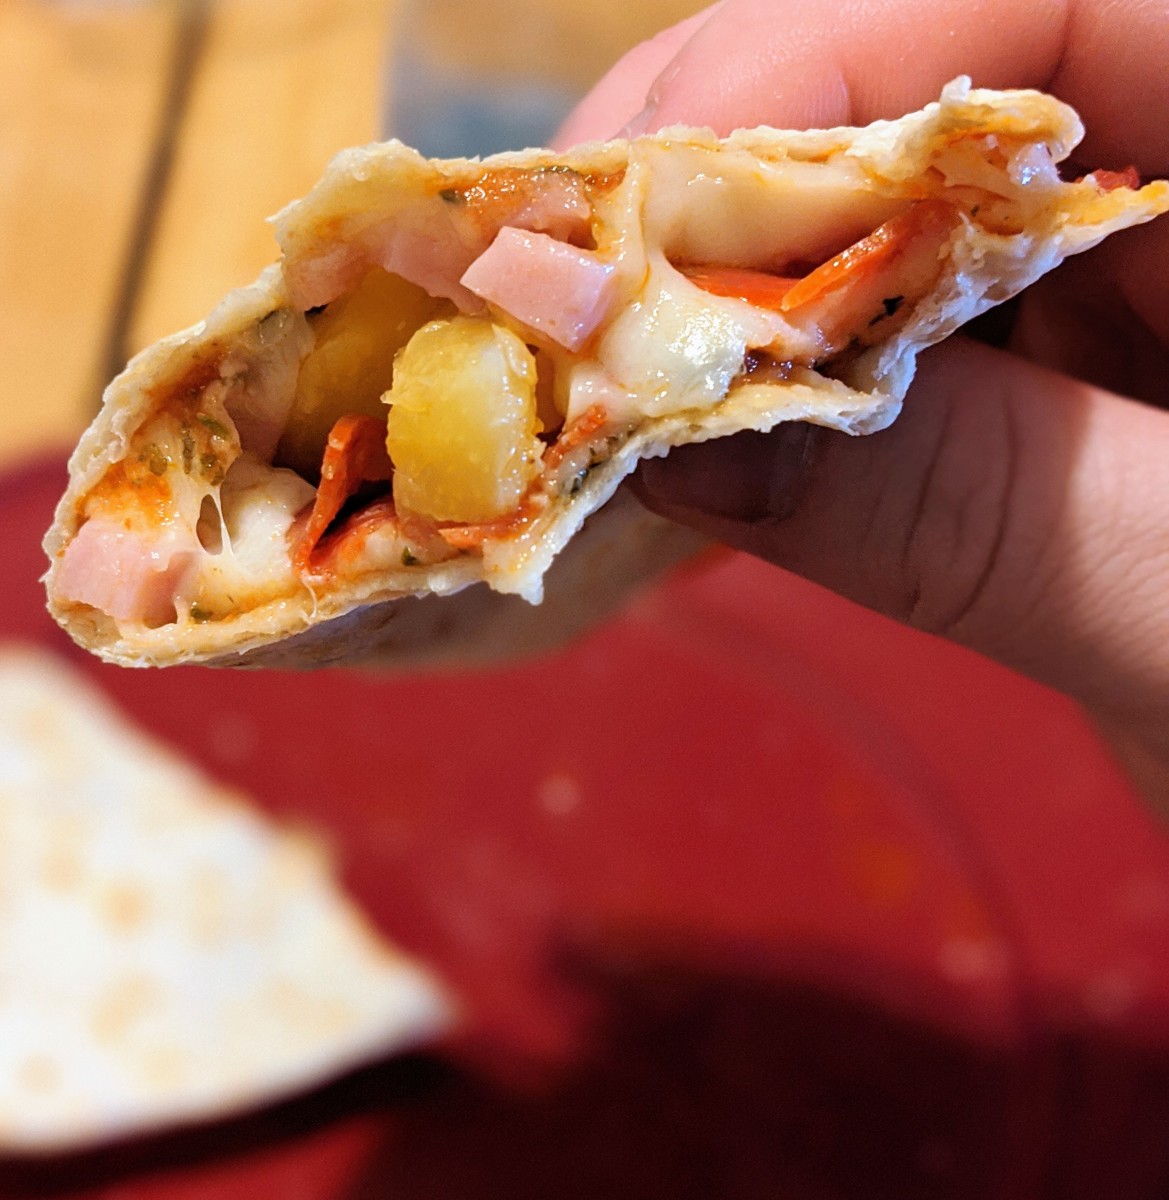 The inside of a pizzadilla is packed with flavor!